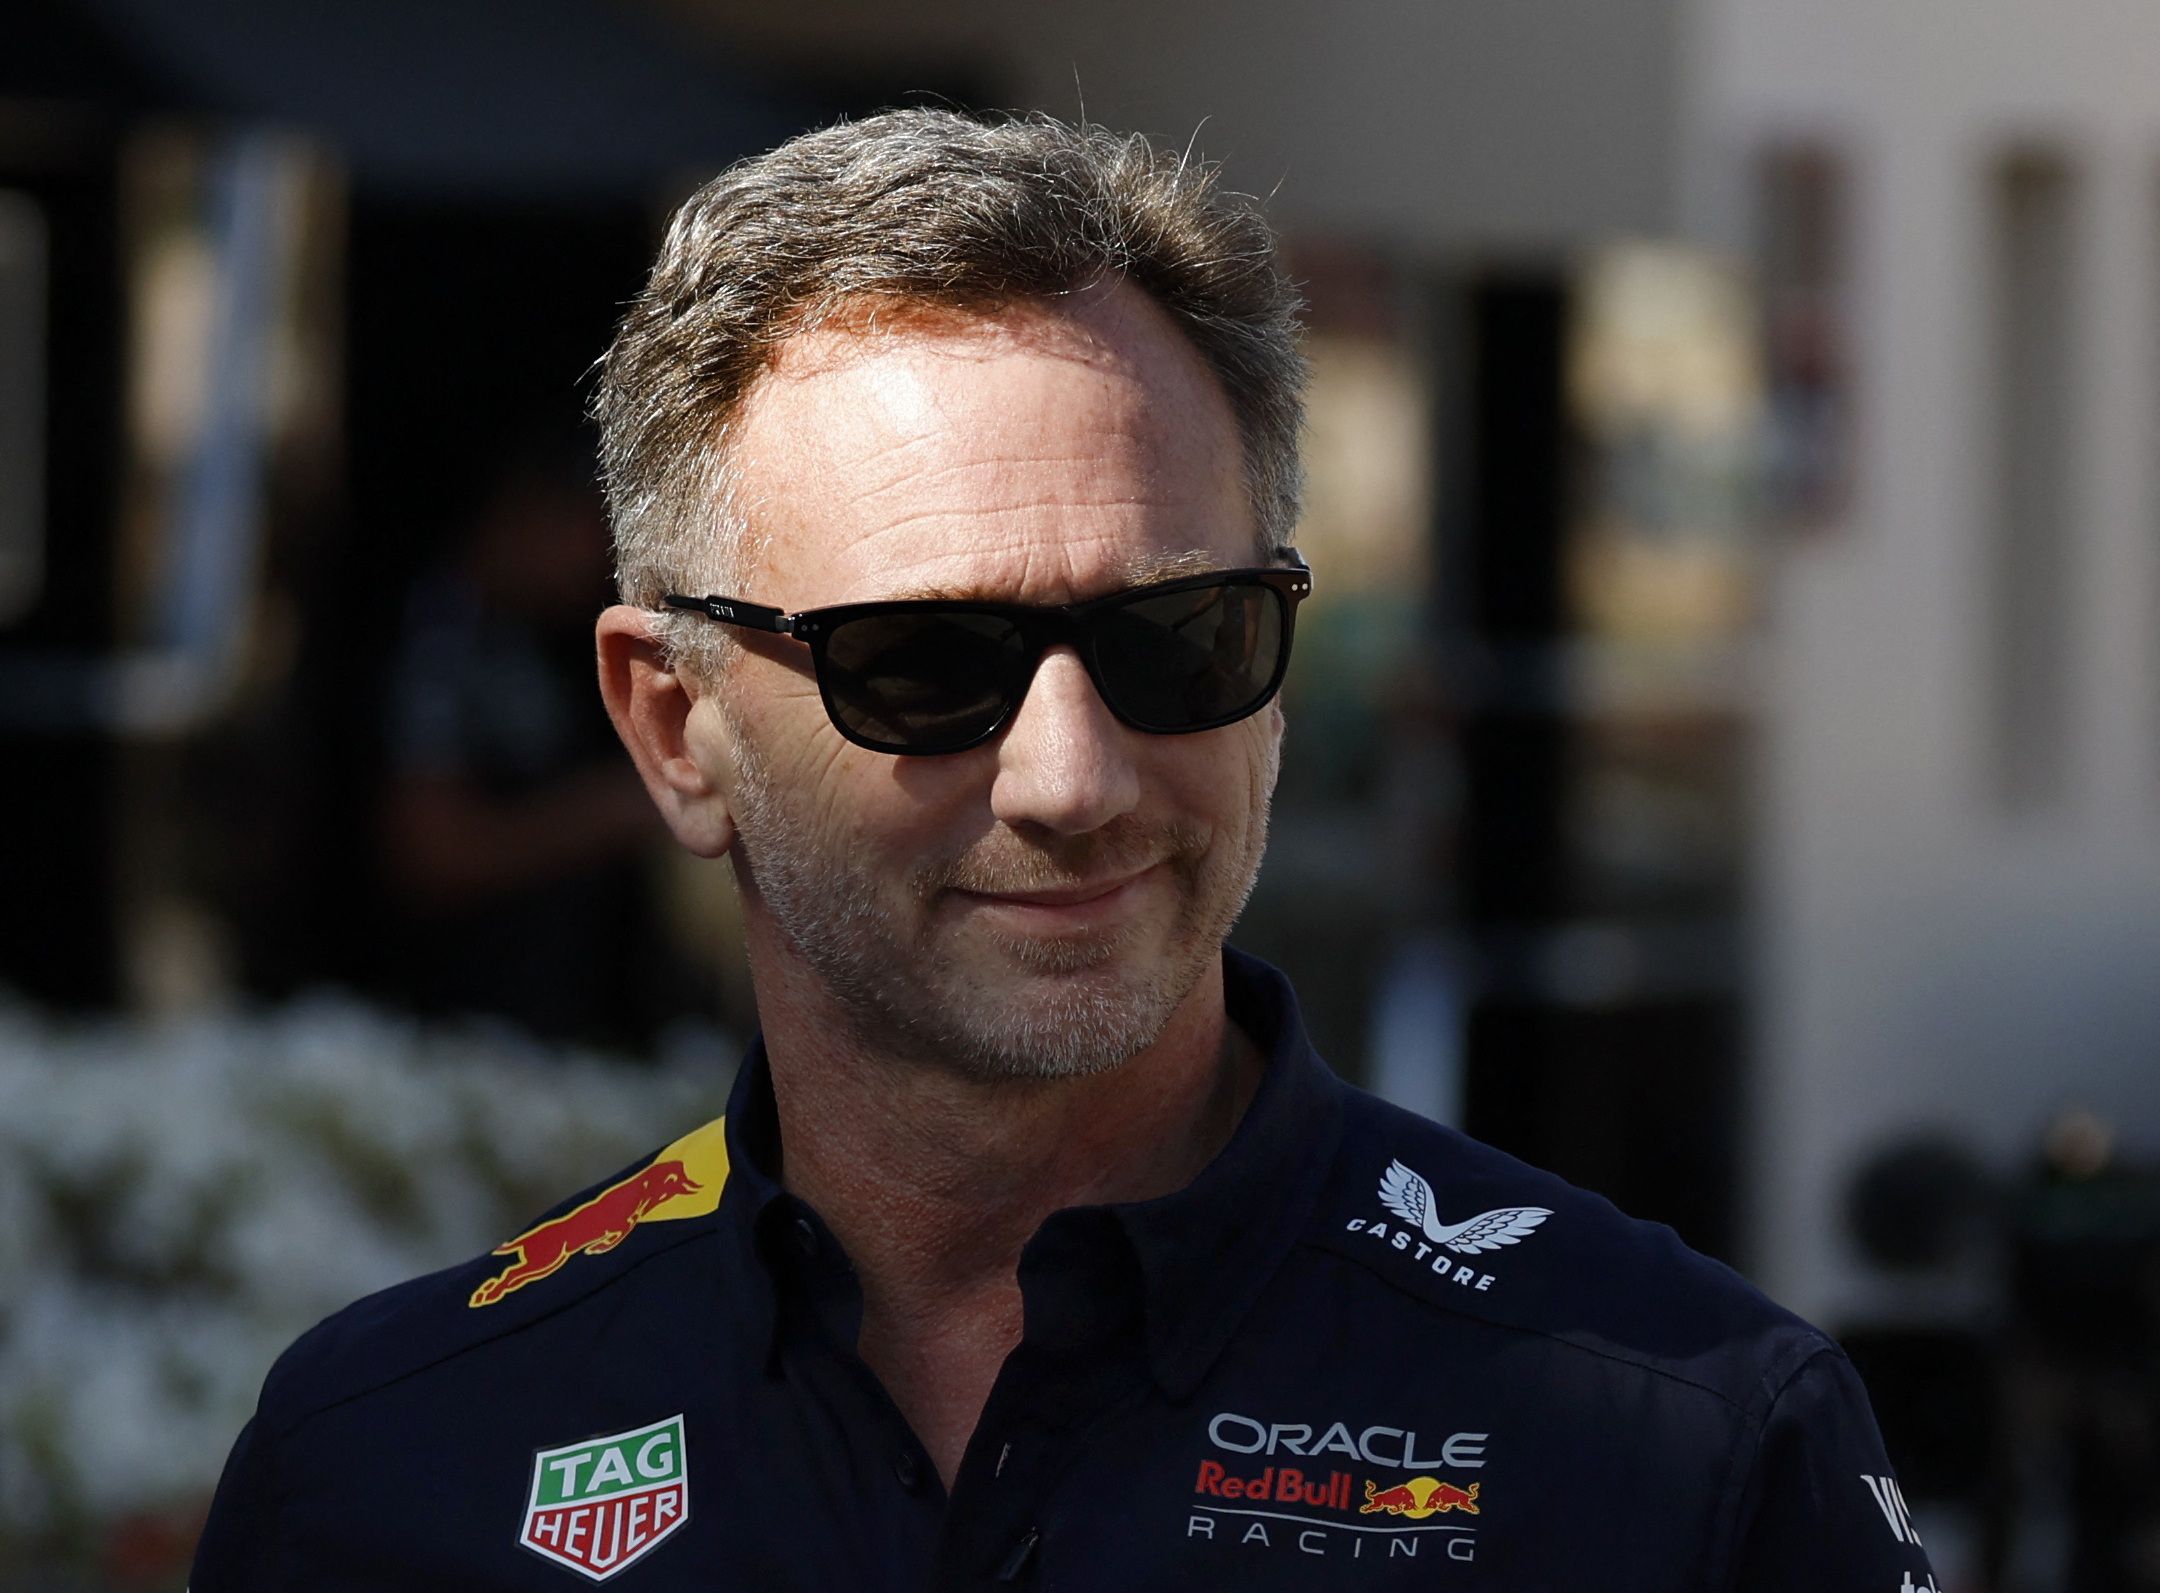 Red Bull F1's Next Steps Following Horner Investigation Clearance